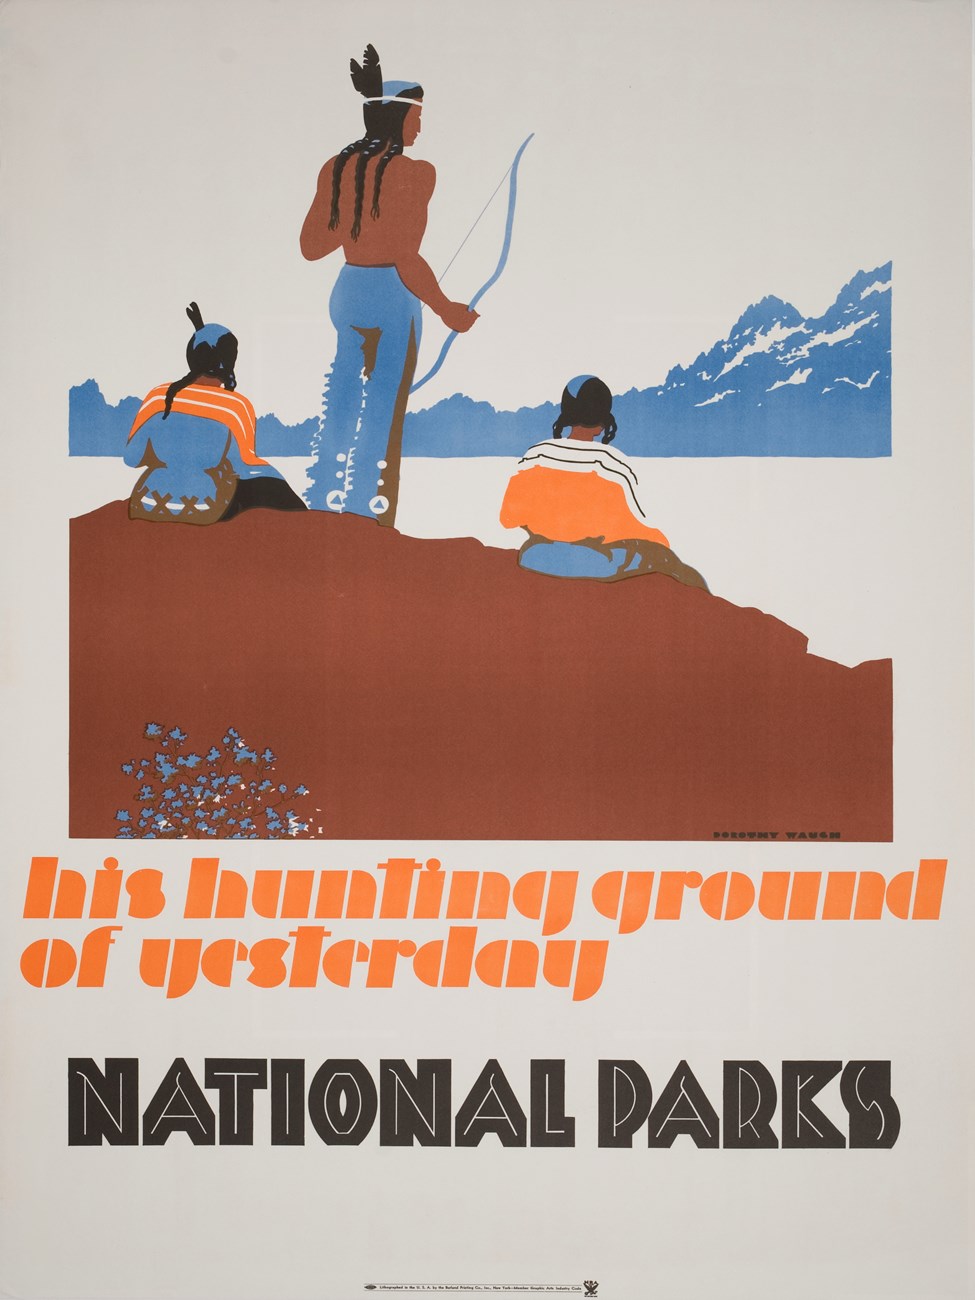 Two Native Americans sit on either side of one who stands holding a bow. Their backs are seen as they look towards mountains in the distance. Text "his hunting ground of yesteryear National Parks" is below the image.